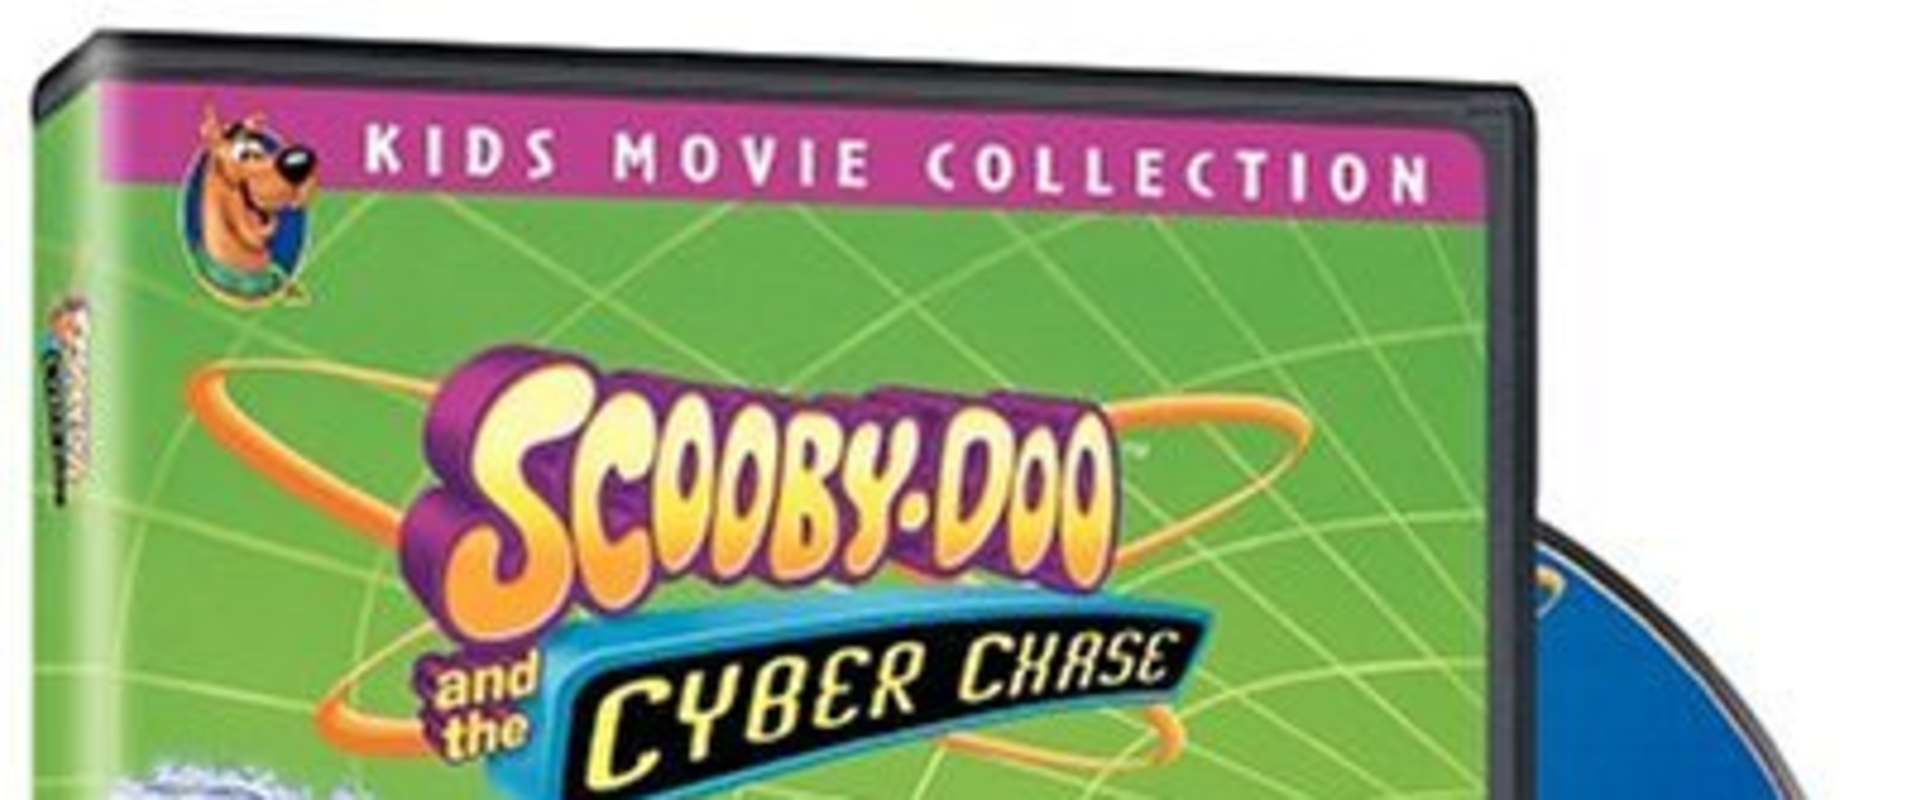 Scooby-Doo! and the Cyber Chase background 1